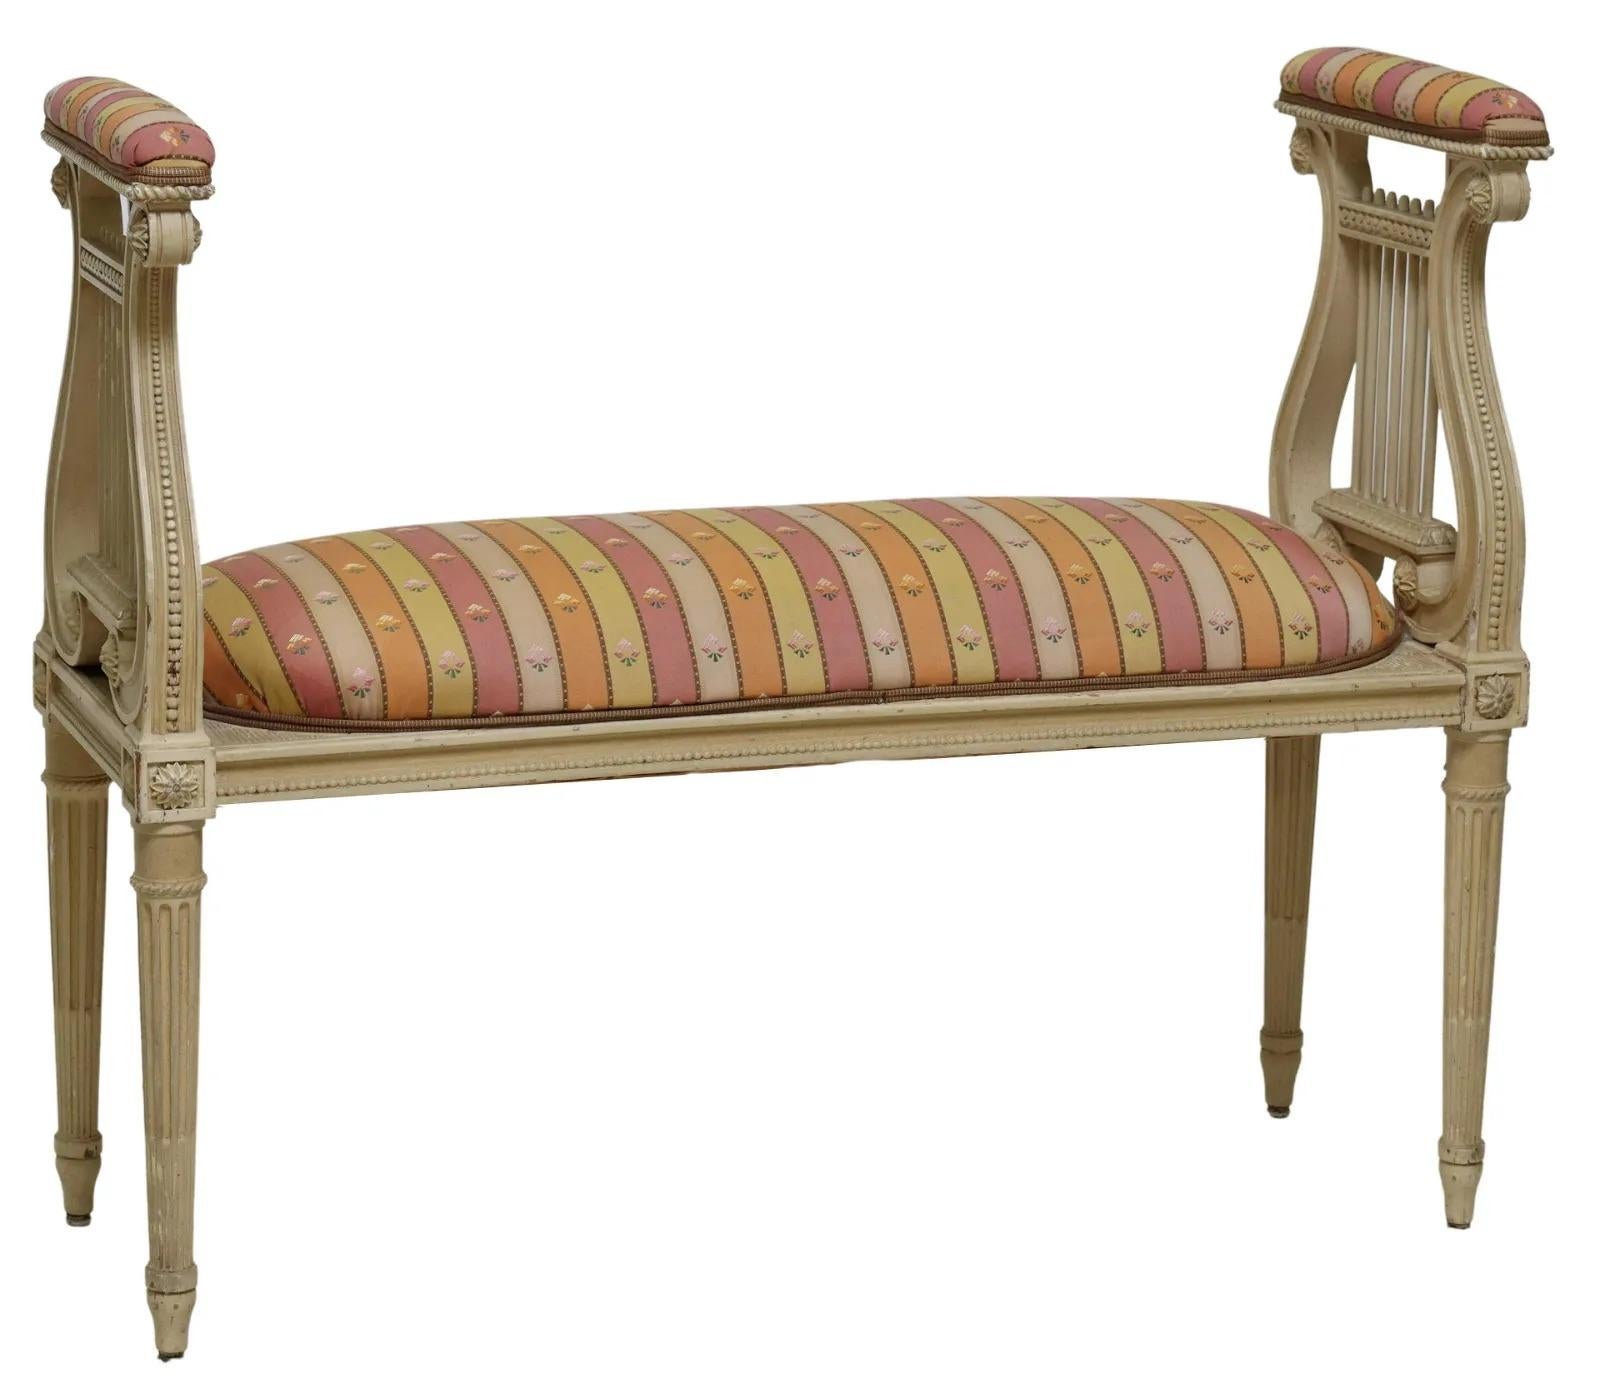 Vintage Louis XVI Style Upholstered Painted Lyre Bench In Good Condition For Sale In Sheridan, CO